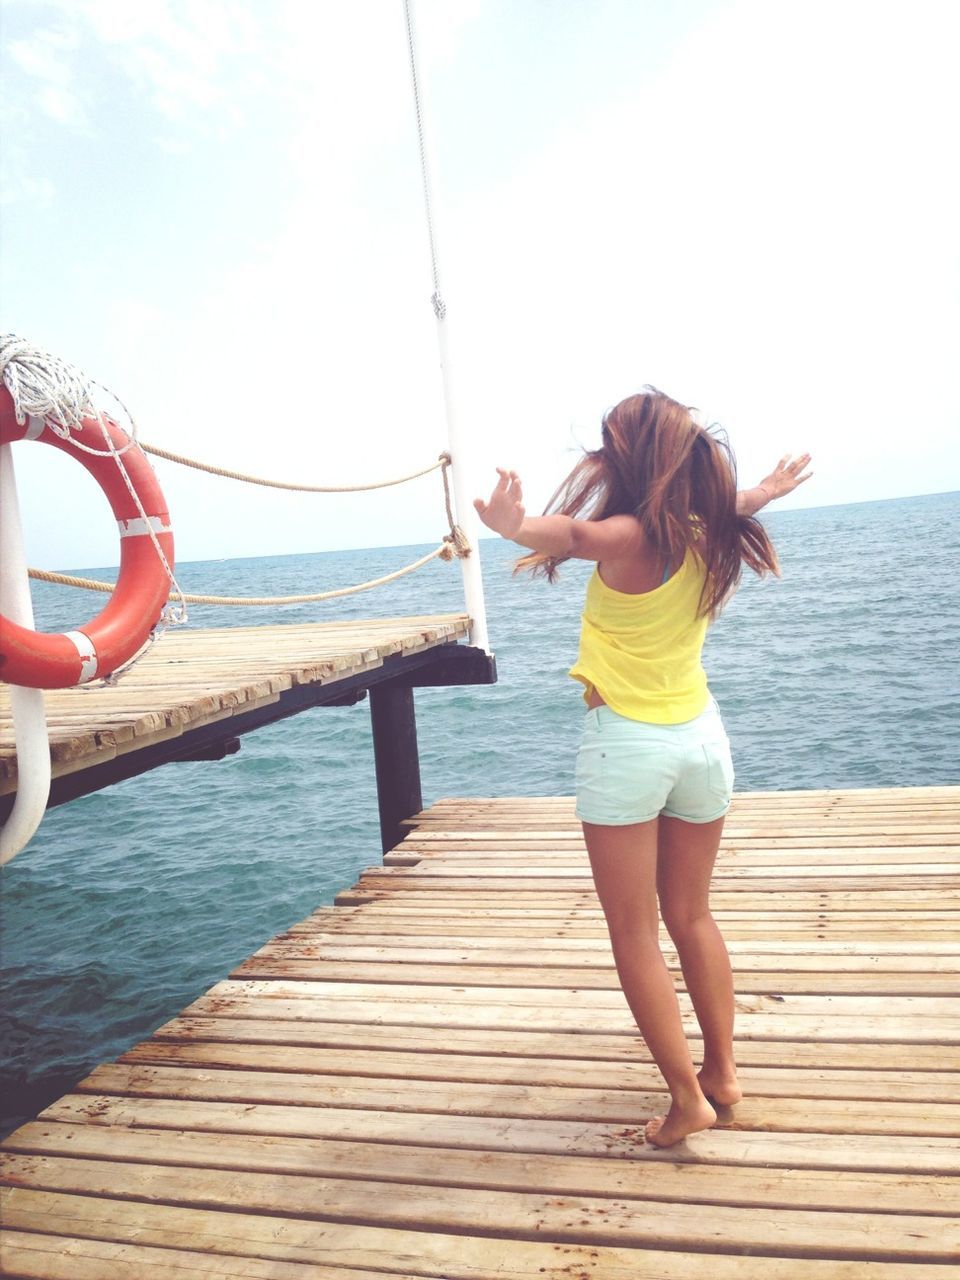 A young woman stands alone on a dock while stretching